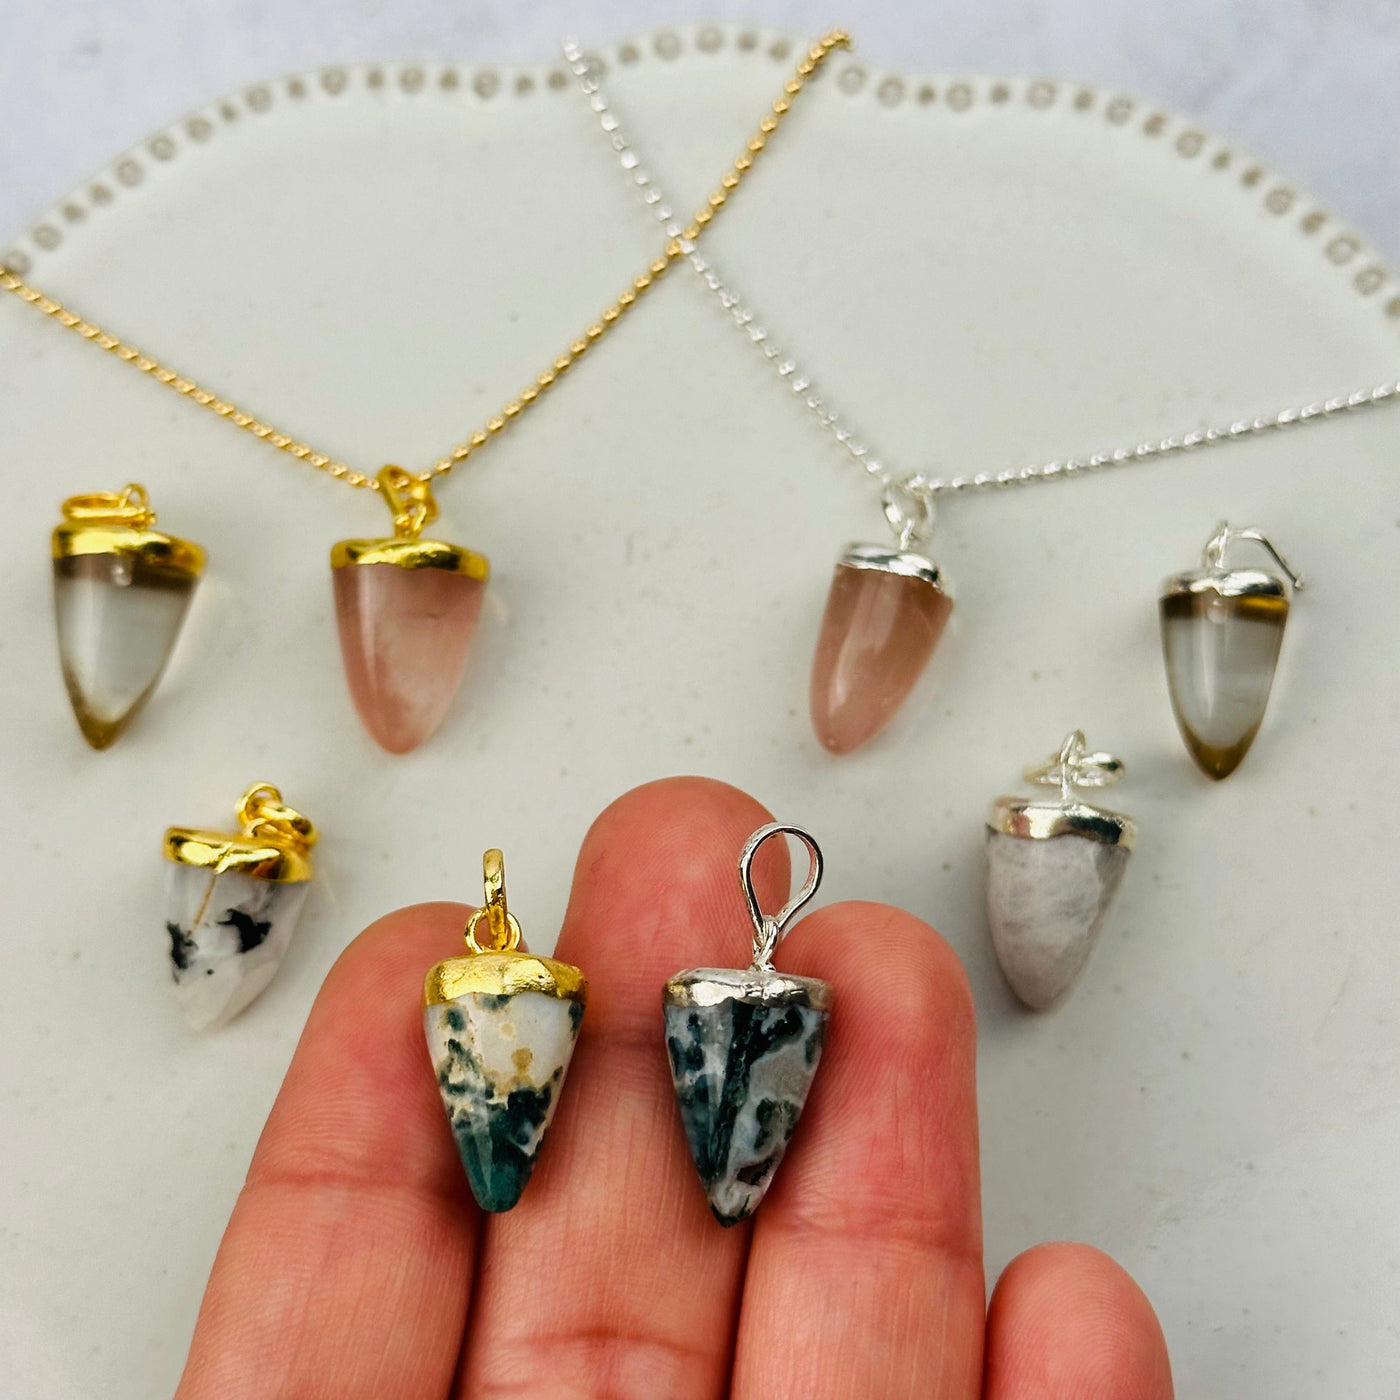 Gemstone Point Pendant with Electroplated 24k Gold or Silver Cap and Bail in hand for size reference 